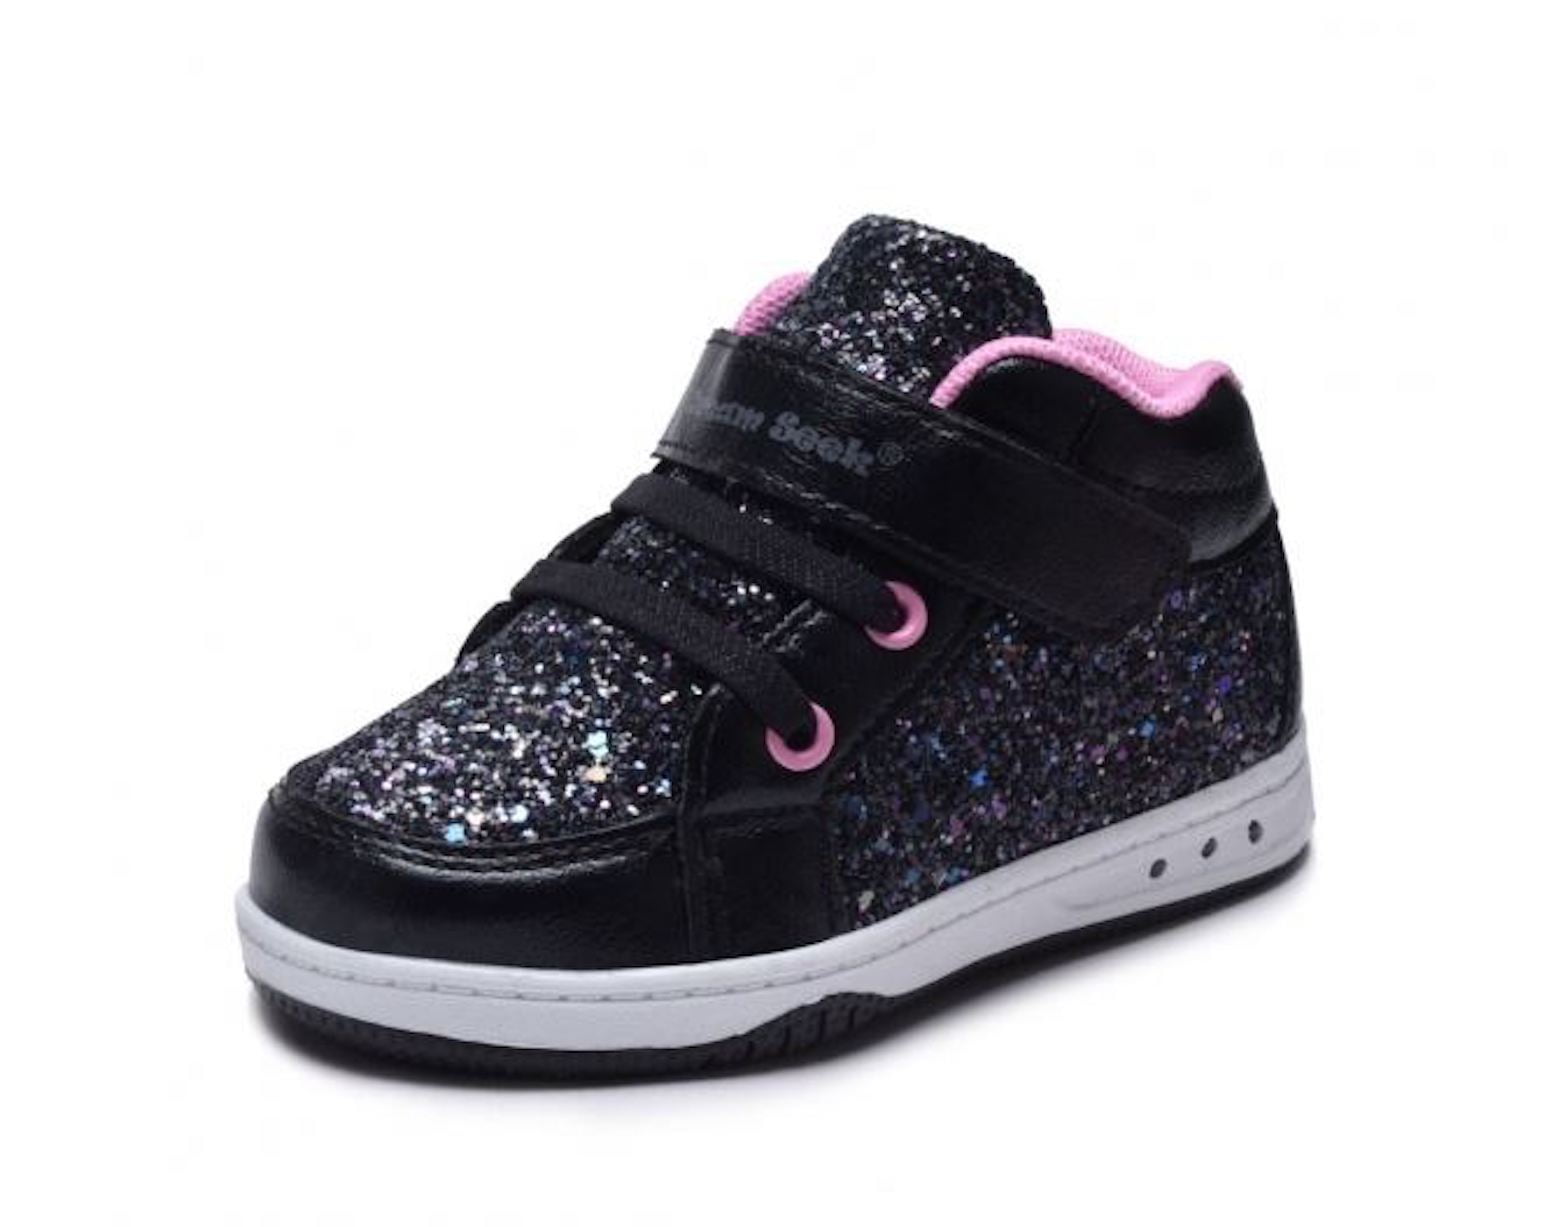 Toddler Kids Sneakers School Shoes for Girls Glitter with Hook and Loops Design 25 Styles 